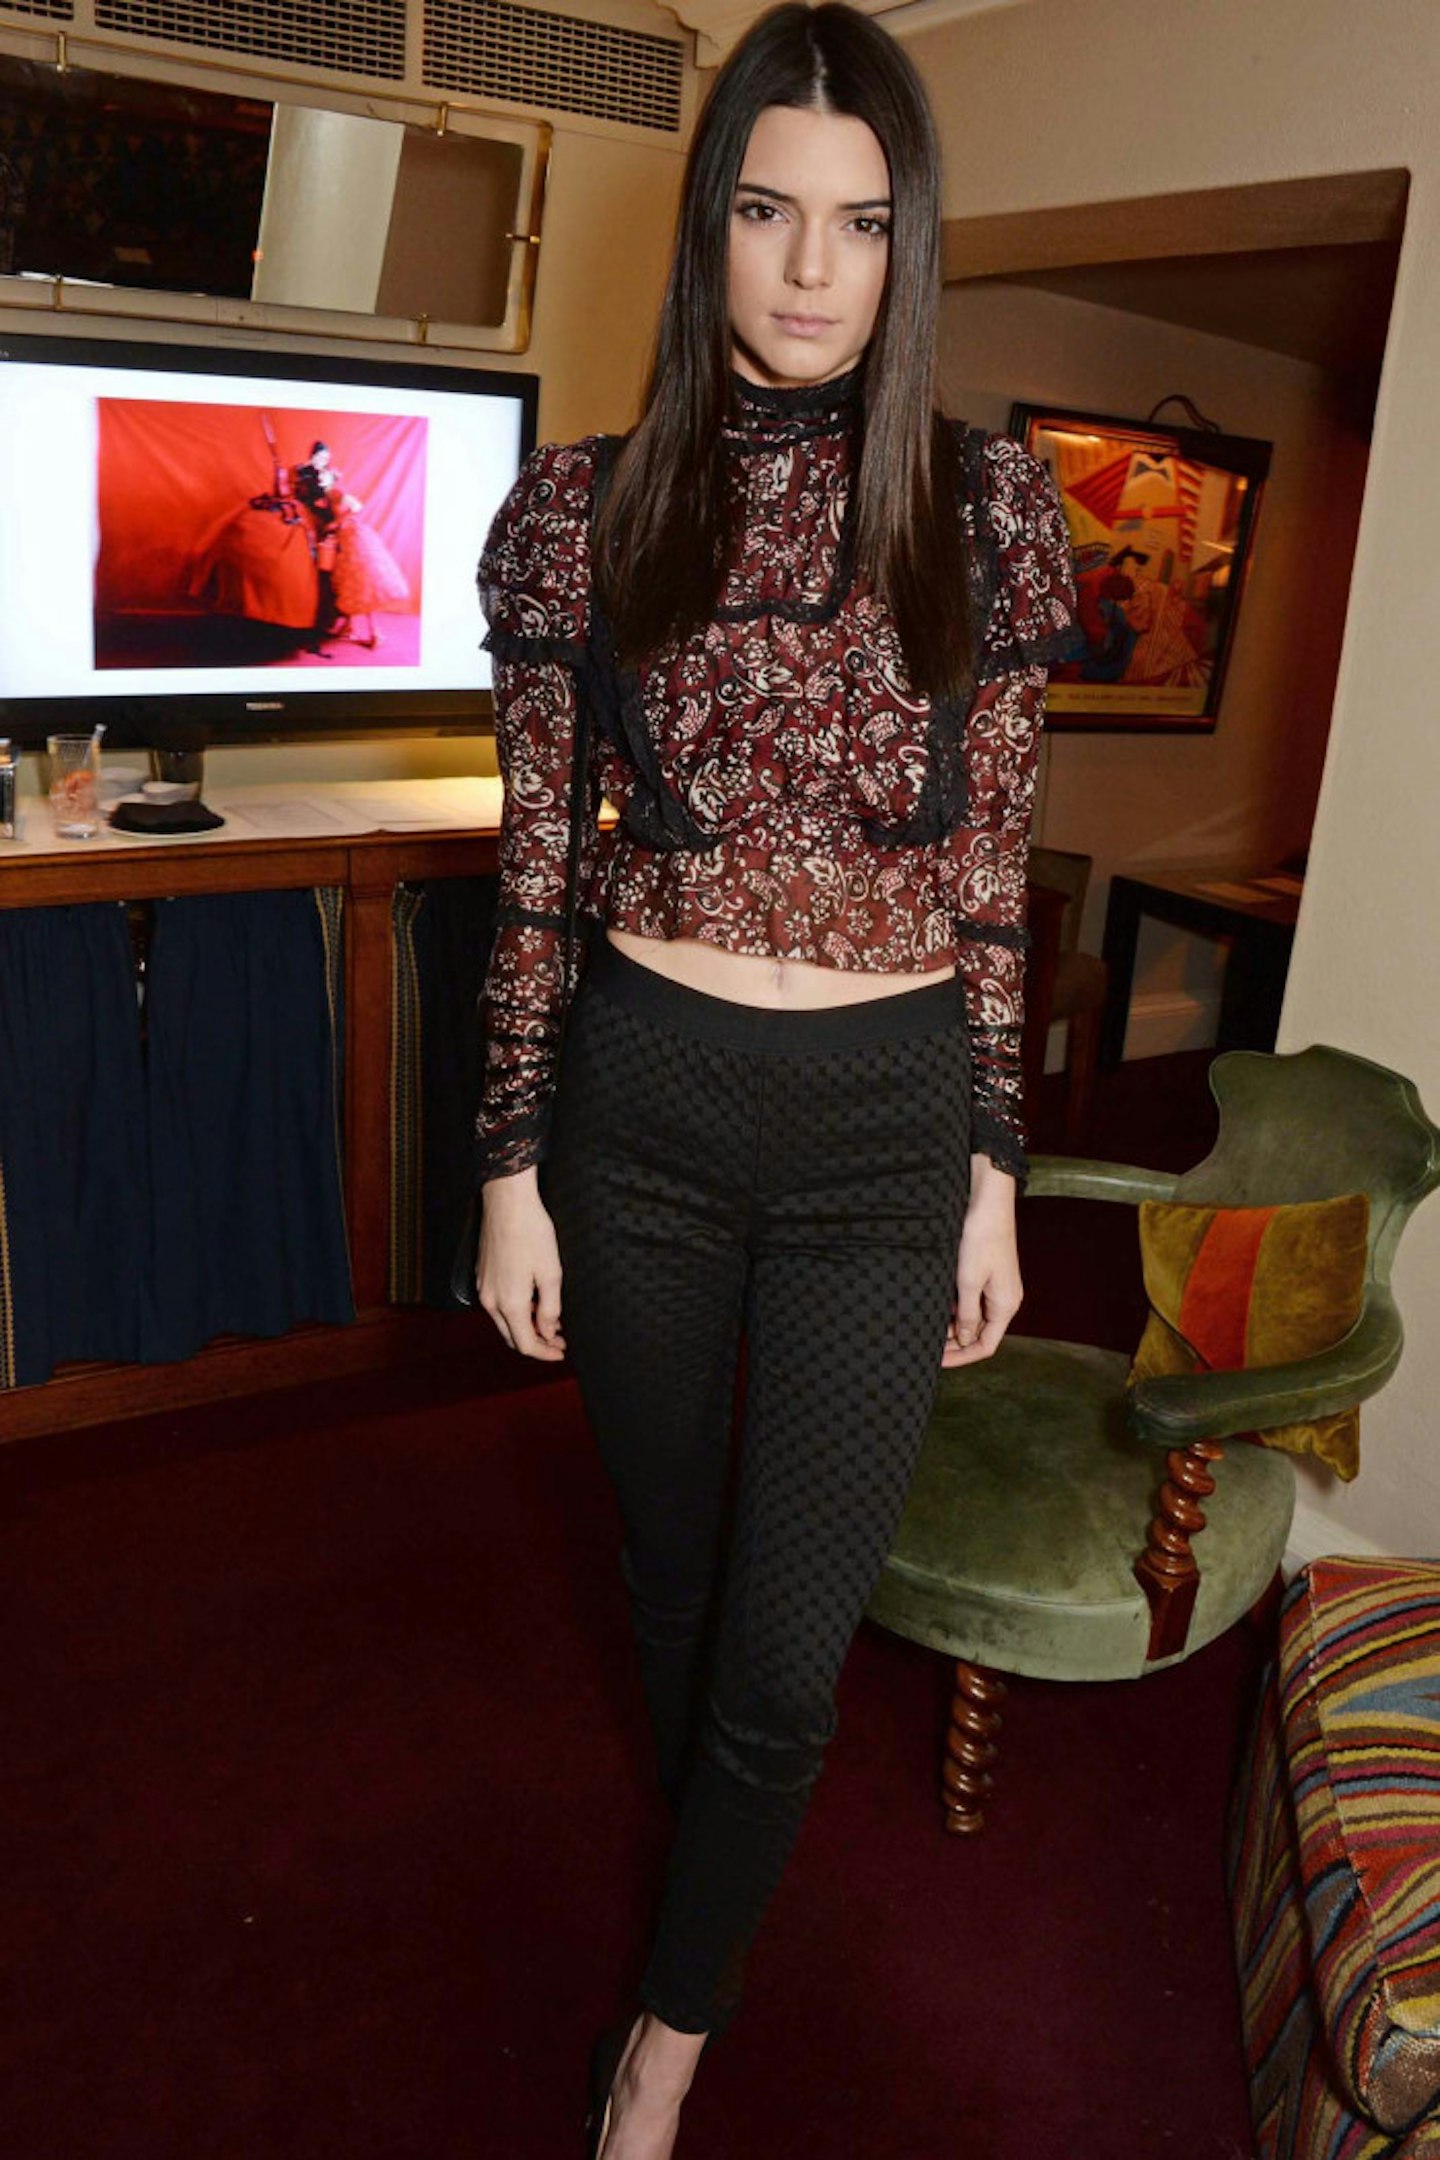 5-endall Jenner attends the launch of LOVE special editions at George on February 17, 2014